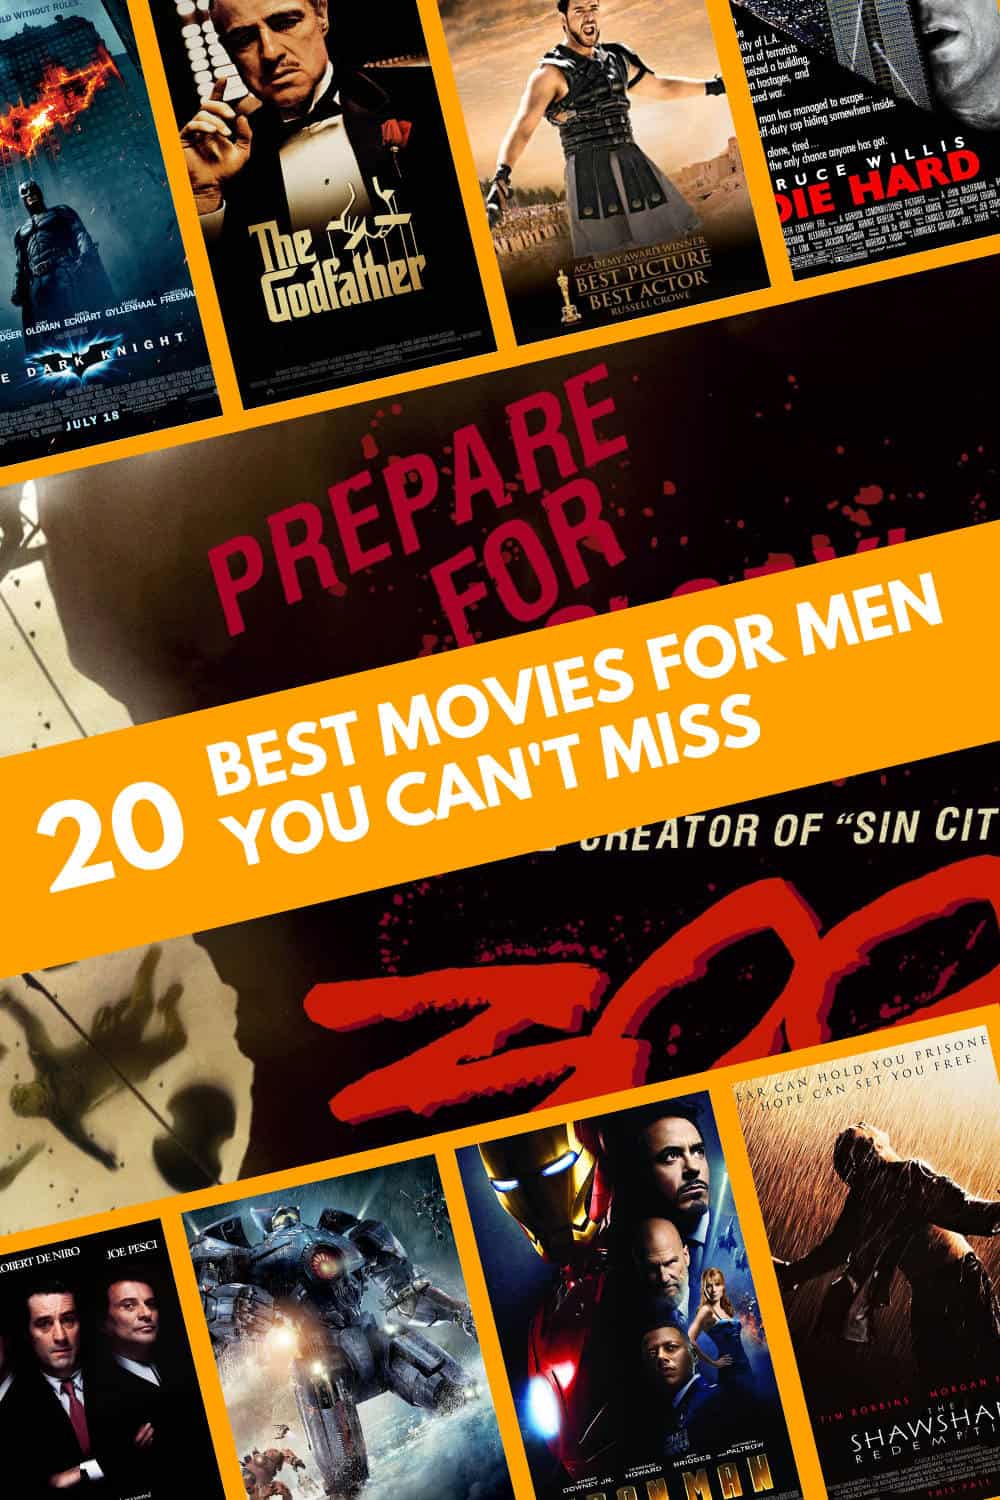 Movies for Men You Can't Miss